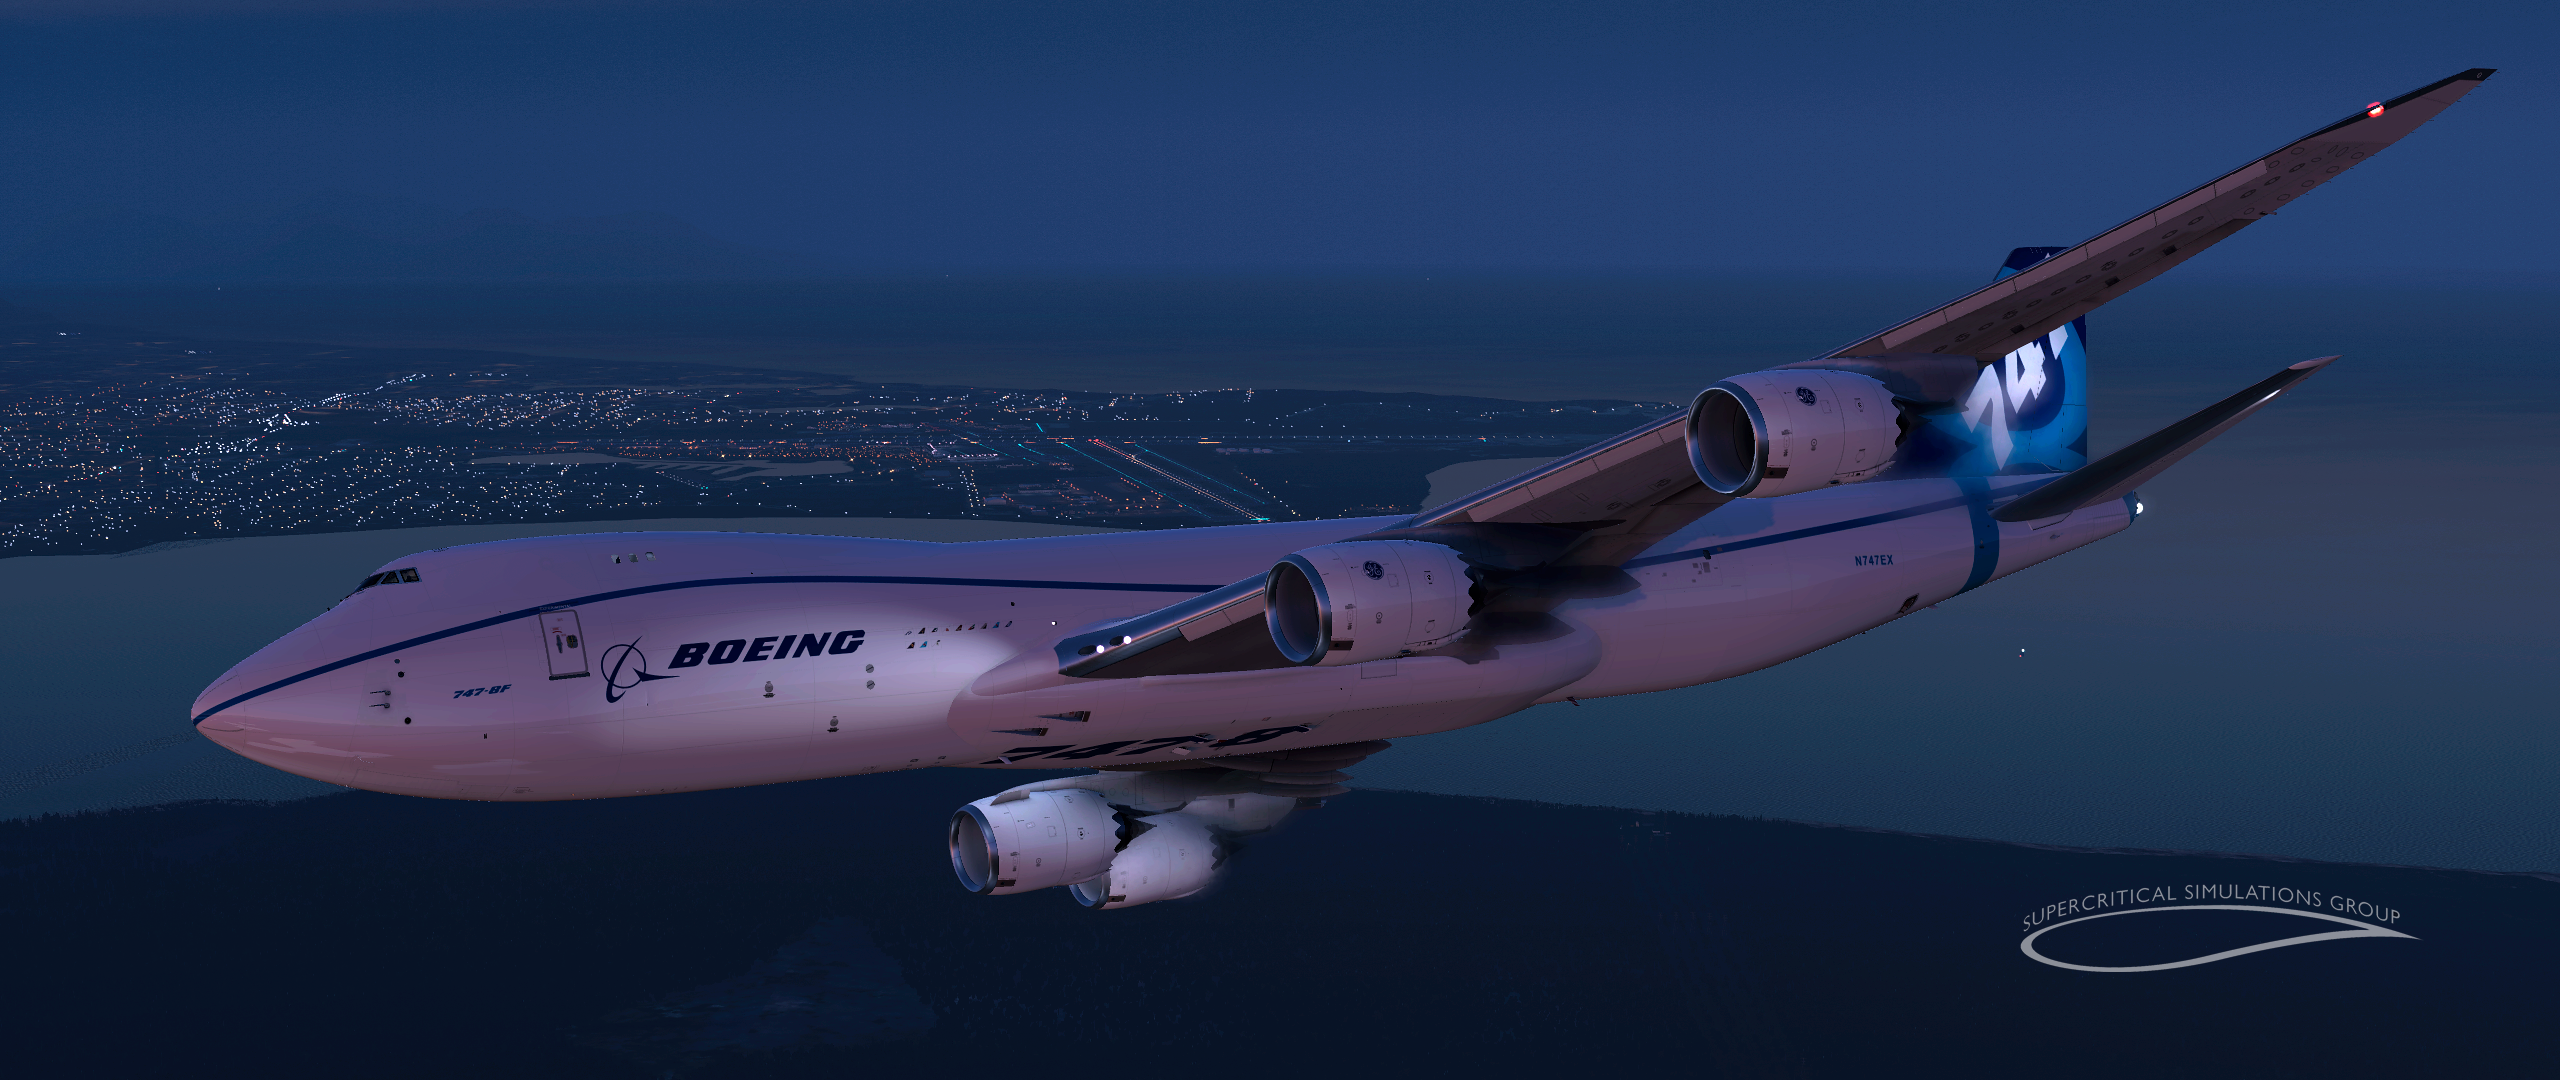 SSG Releases a Major Update for the 747 (XP11) - SSG, X-Plane